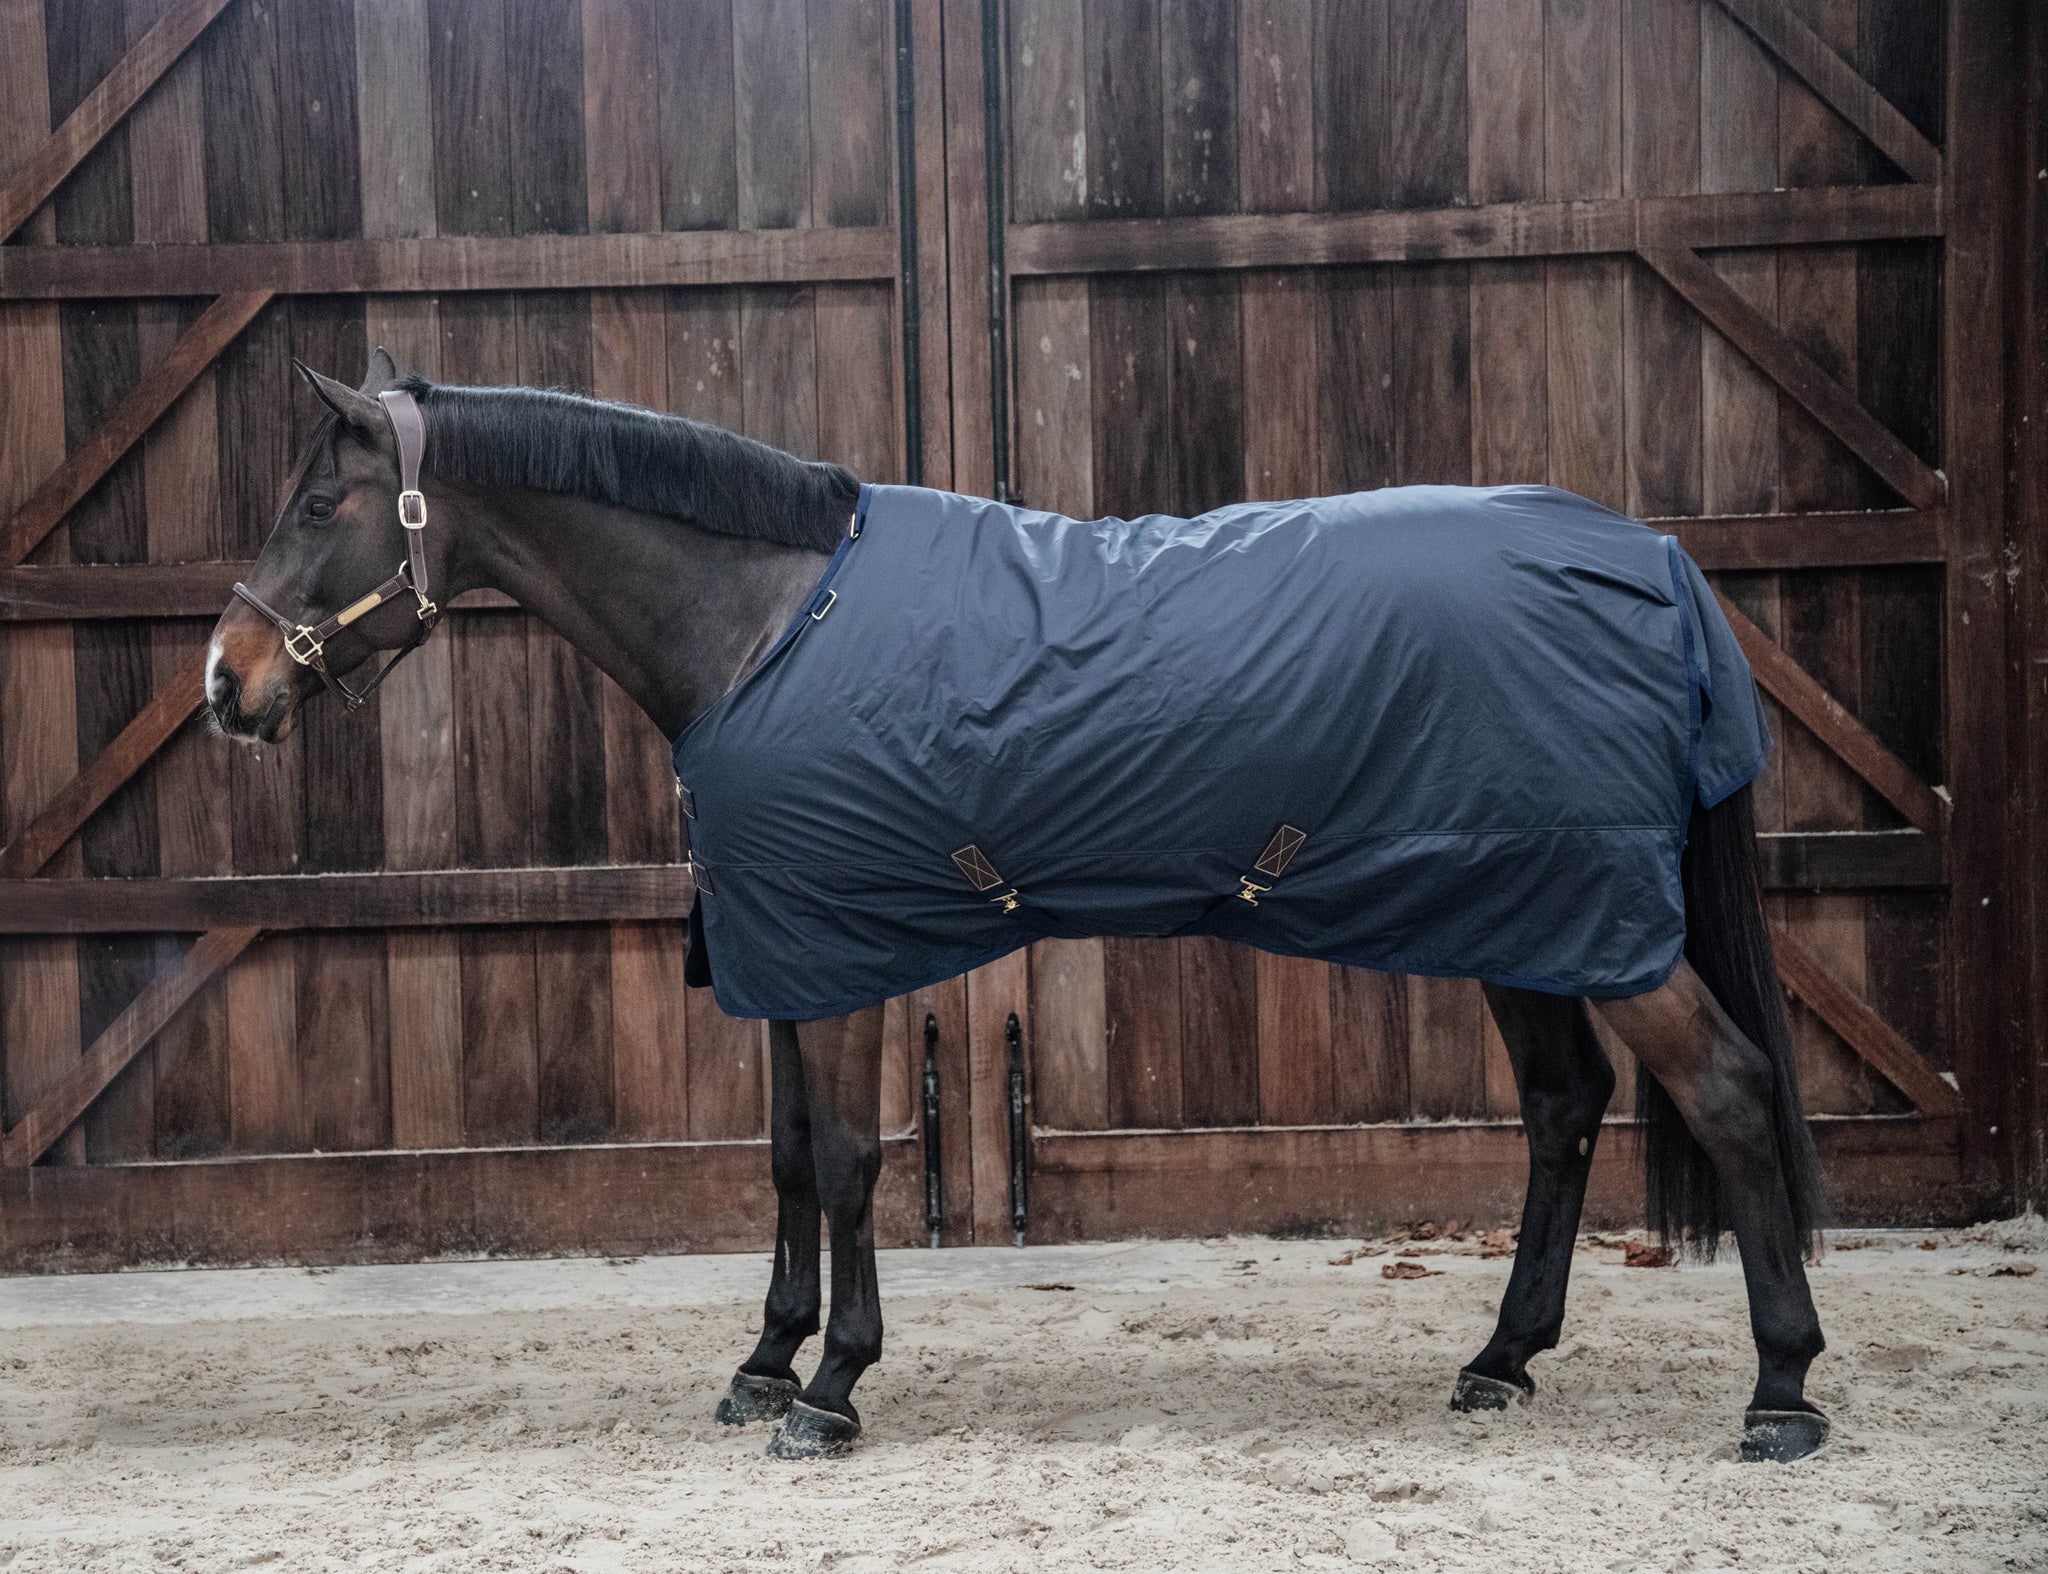 Kentucky Hurricane Turnout Rug All Weather  The Kentucky Horsewear, the Turnout Rug Hurricane is a unique new product which features a unique water blocking outer layer for in the field or paddock. Super versatile and hard wearing, the rug will be a reliable product able to guarantee to keep you horse dry in wet weather, even in the heaviest of rain fall. For extreme use in colder climates, we would not advise this turnout rub to be used over a temperature of 10 degrees Celsius.